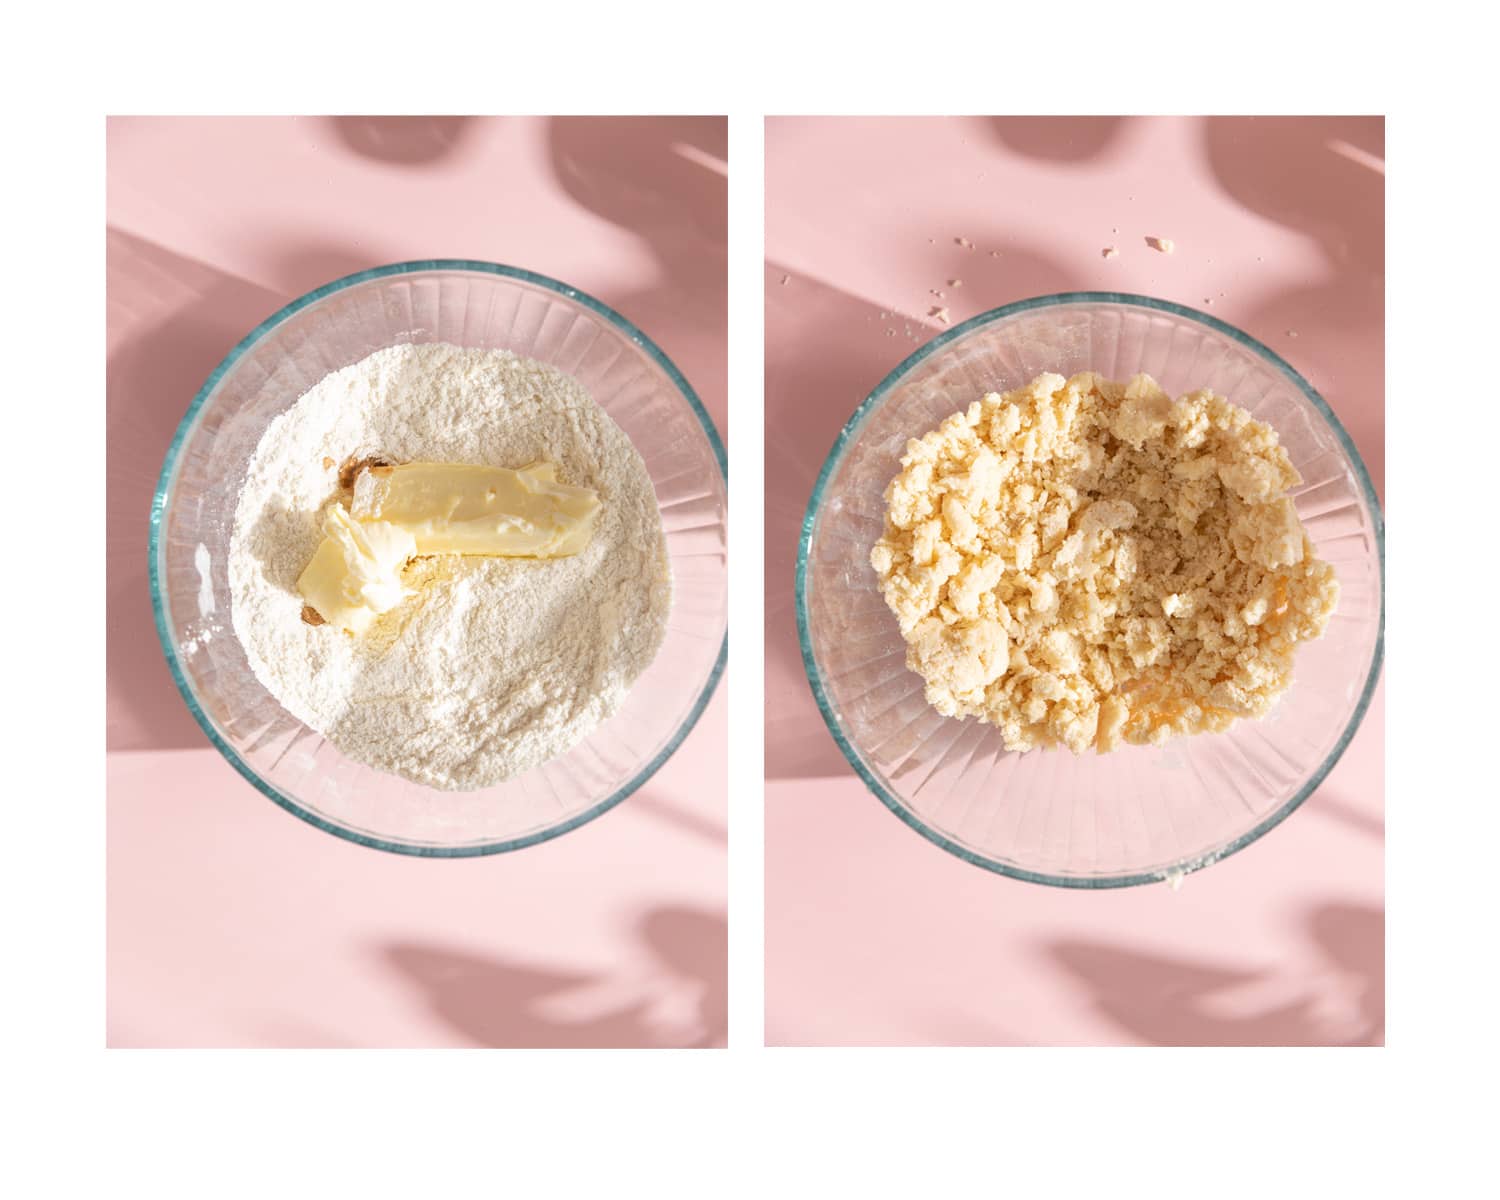 Process images showing how to make buttery streusel.